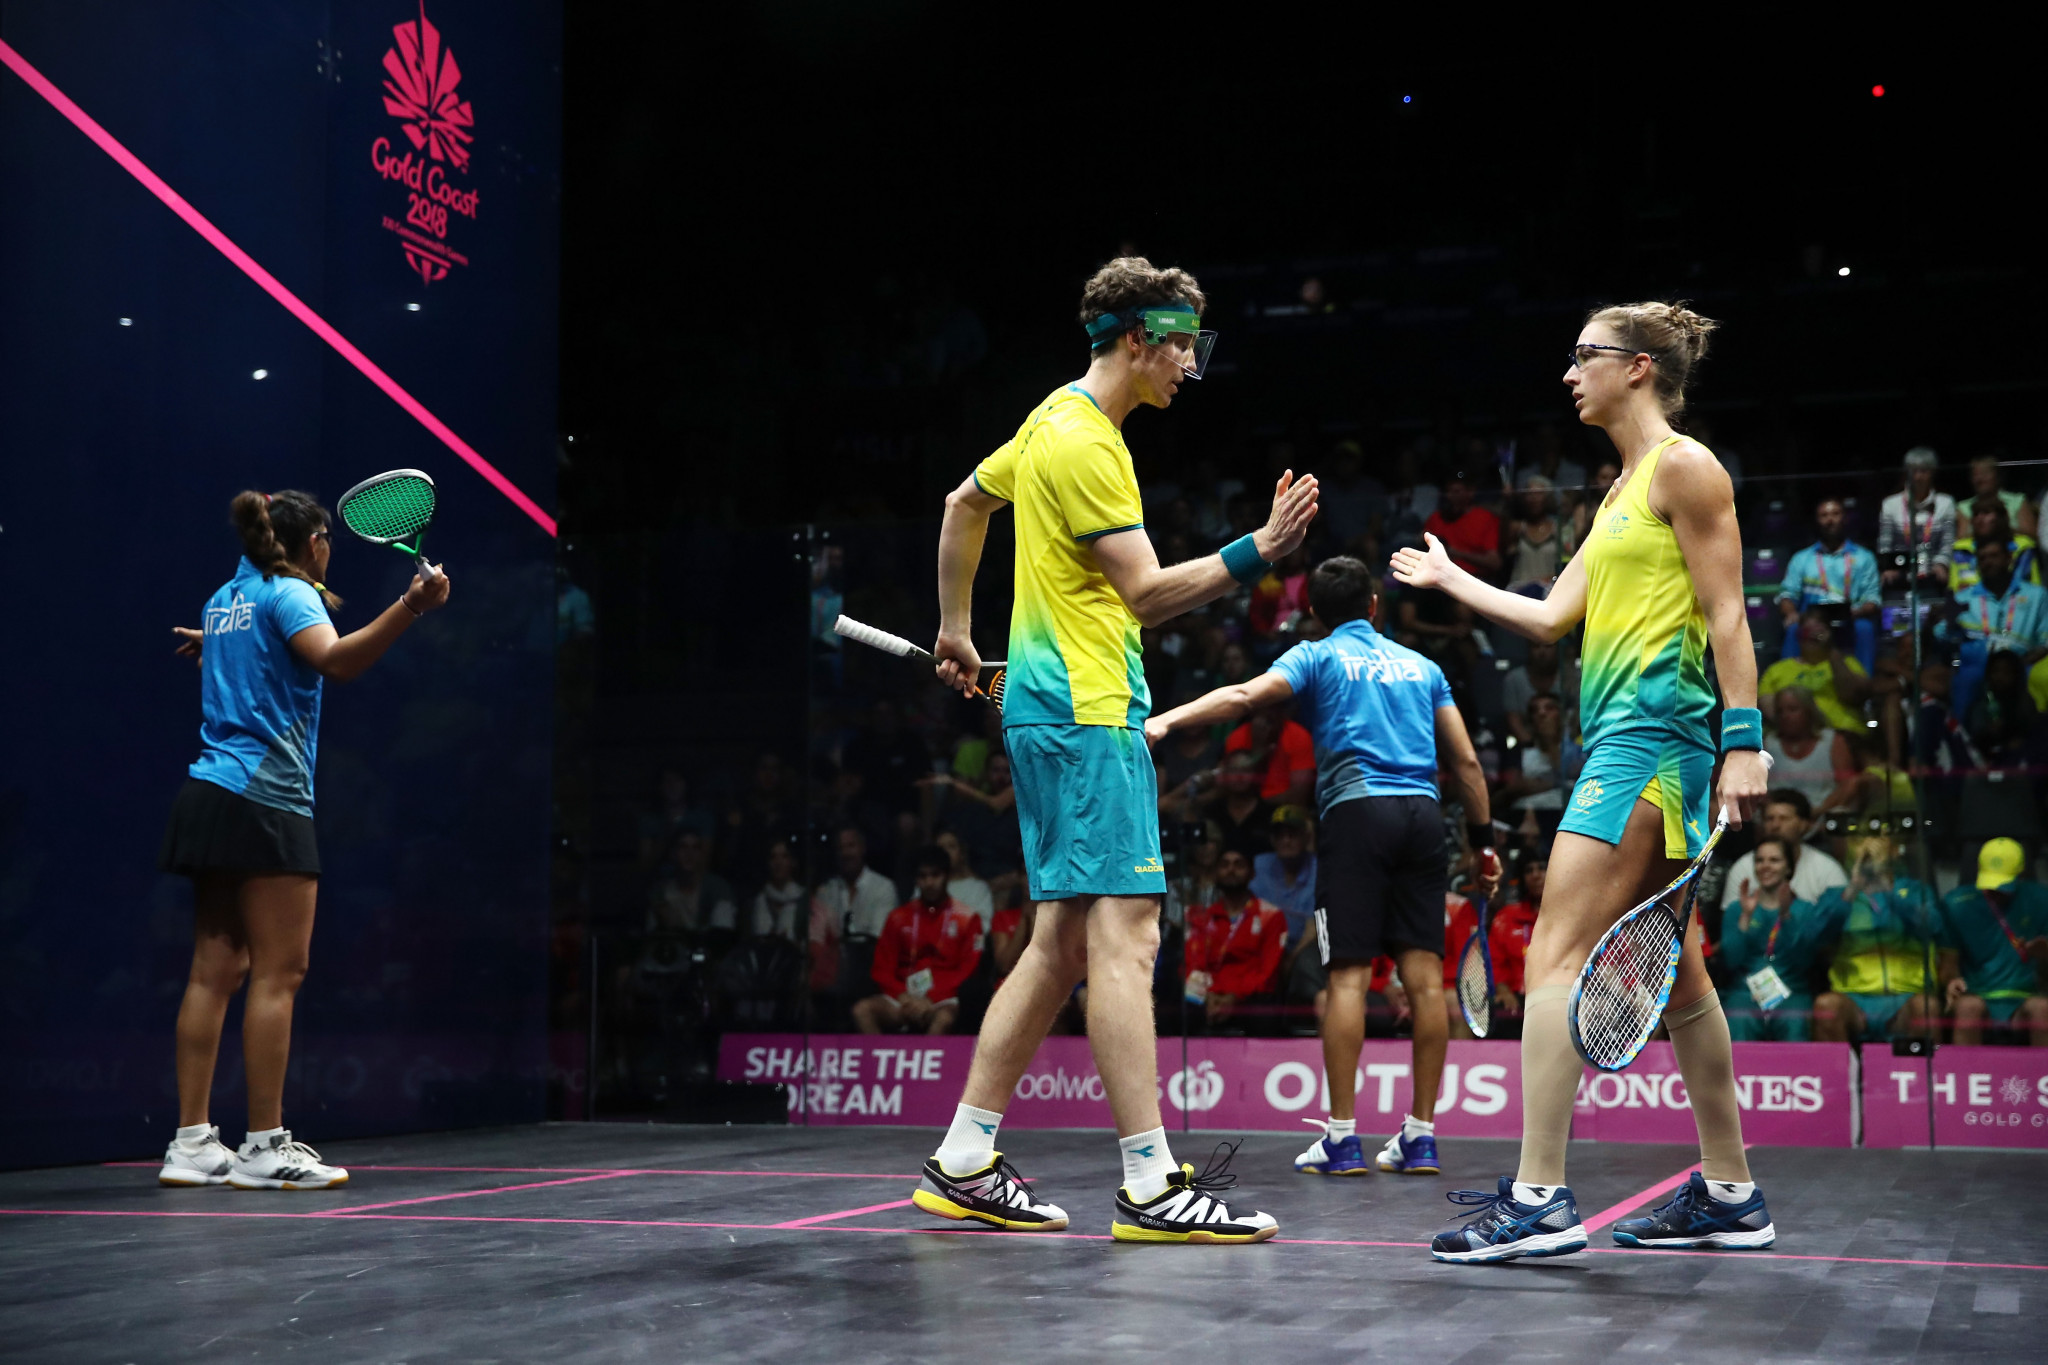 Mixed doubles squash is a part of the Commonwealth Games programme ©Getty Images